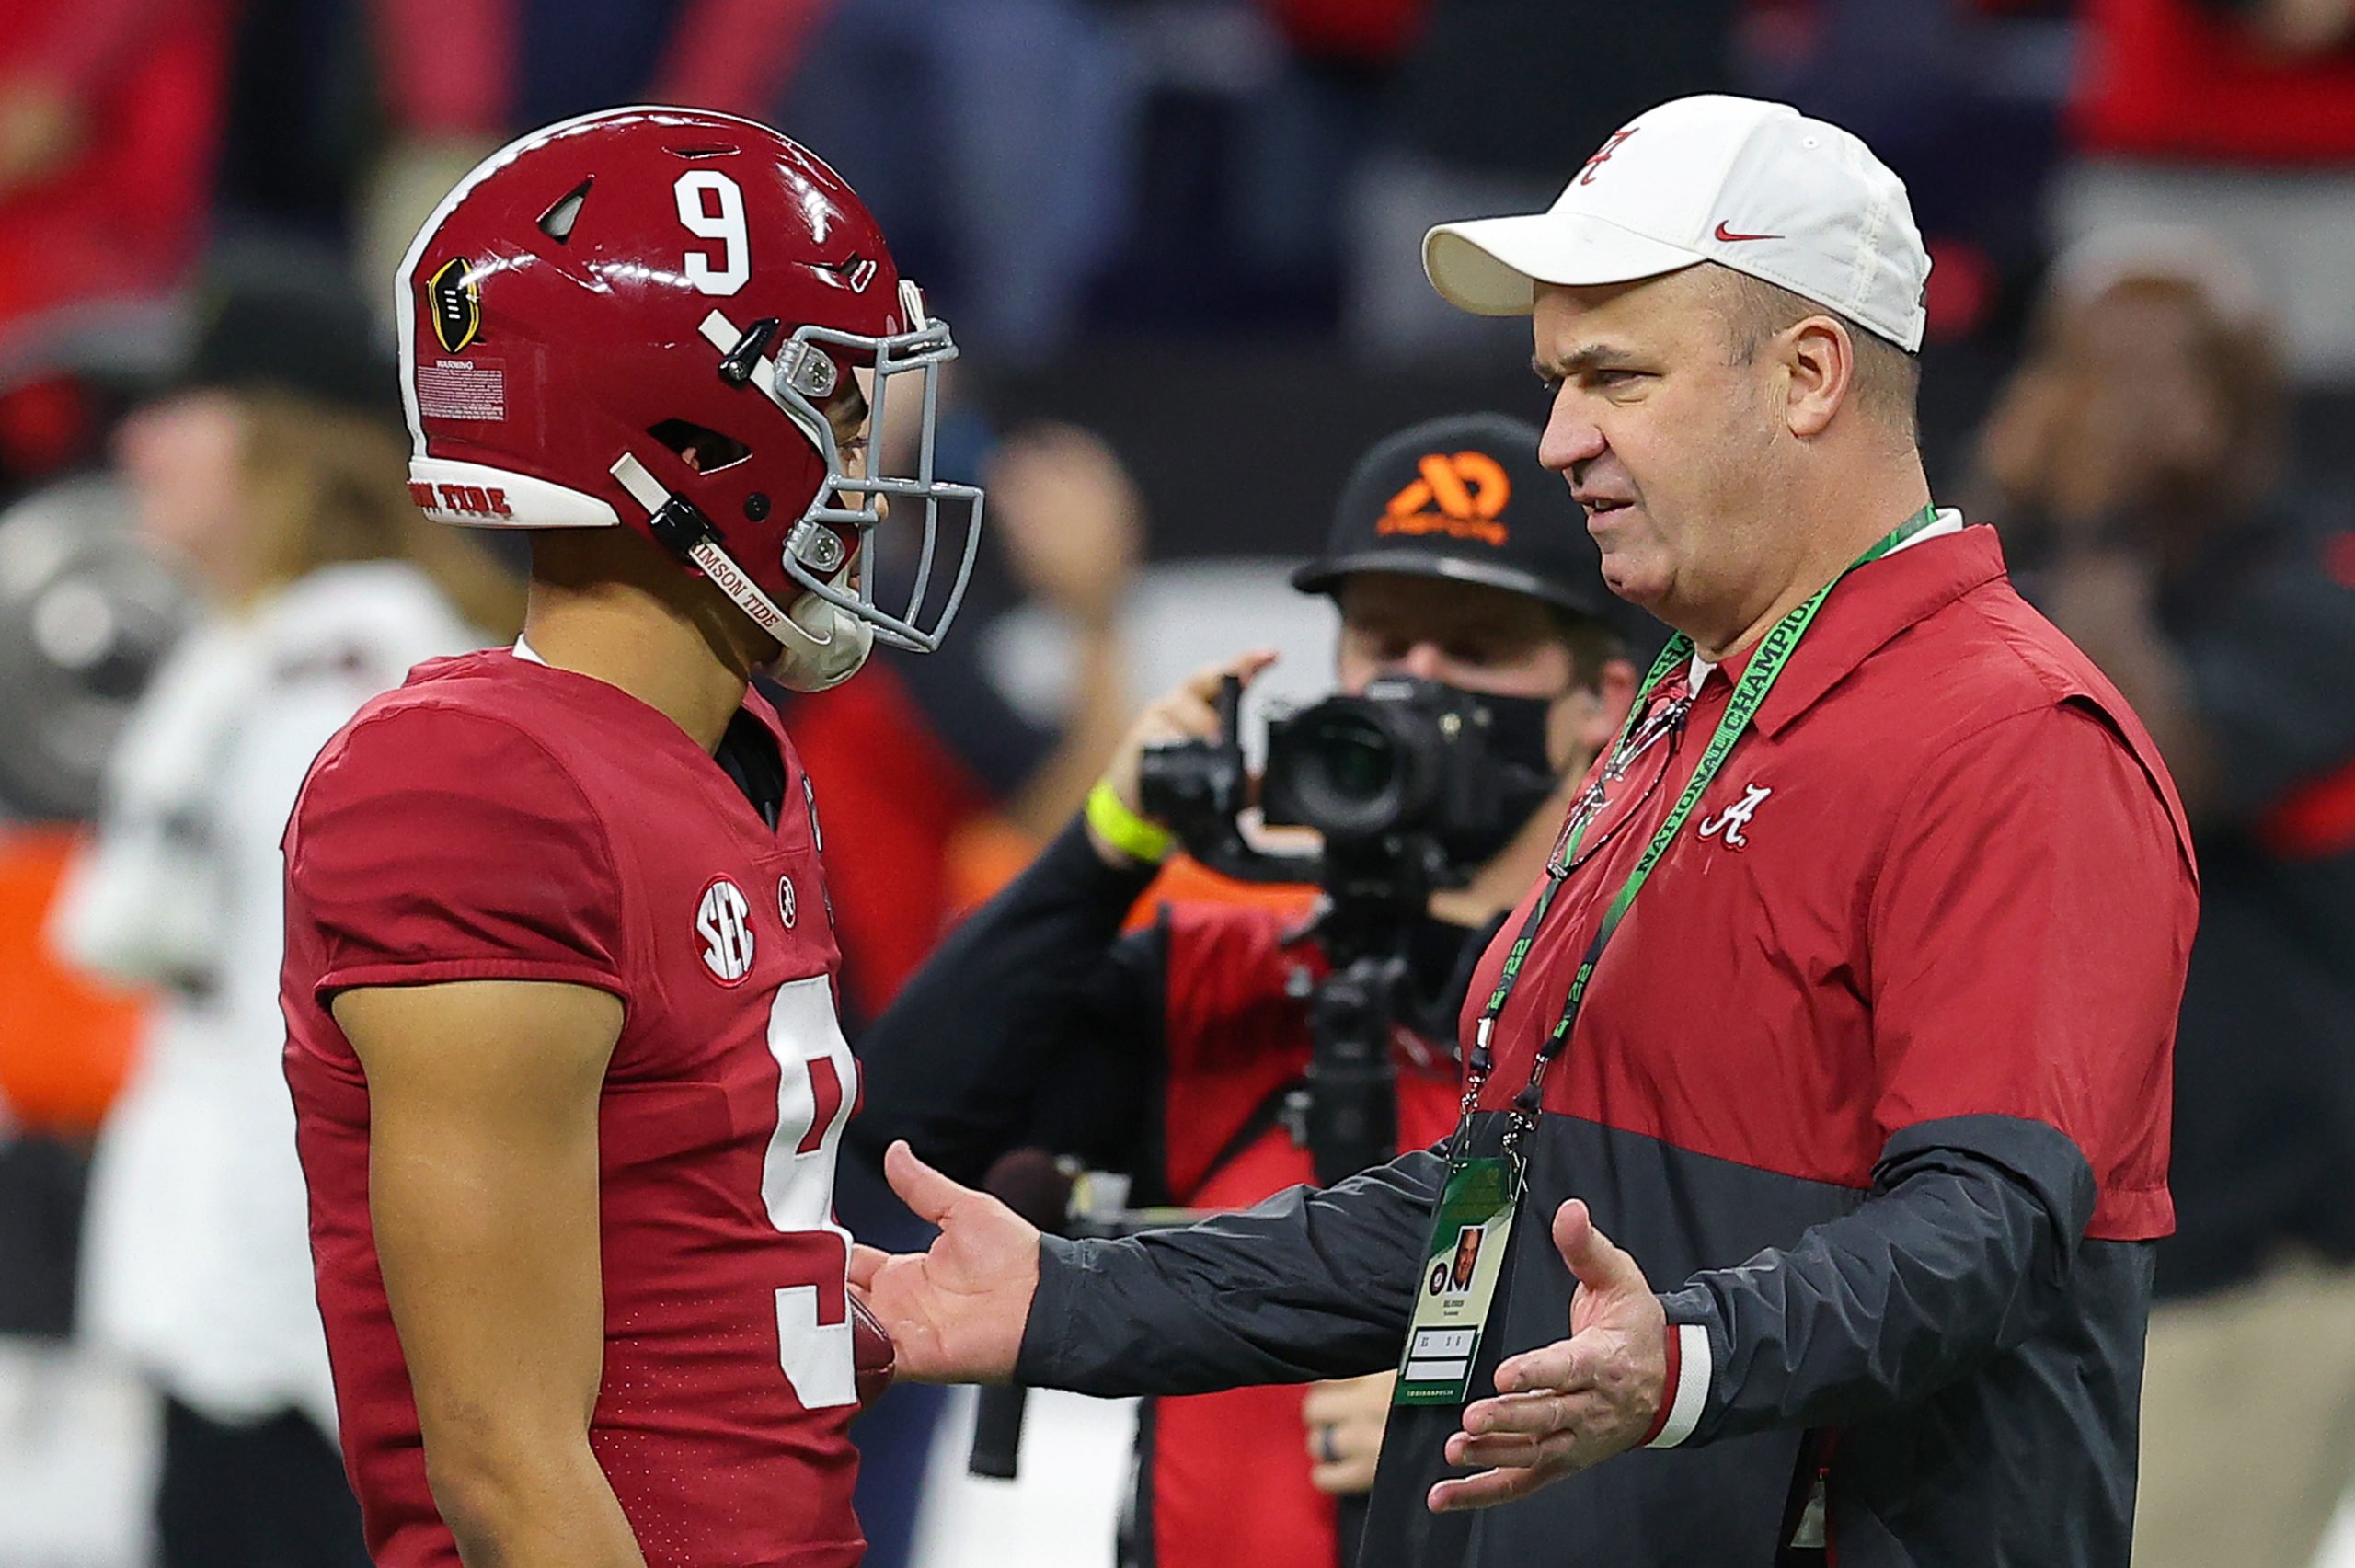 INDIANAPOLIS, INDIANA - JANUARY 10: Bryce Young #9 of the Alabama Crimson Tide, and Alabama Crimson Tide Offensive Coordinator Bill O'Brien talk prior to a game against the Georgia Bulldogs in the 2022 CFP National Championship Game at Lucas Oil Stadium on January 10, 2022 in Indianapolis, Indiana. Kevin C. Cox/Getty Images